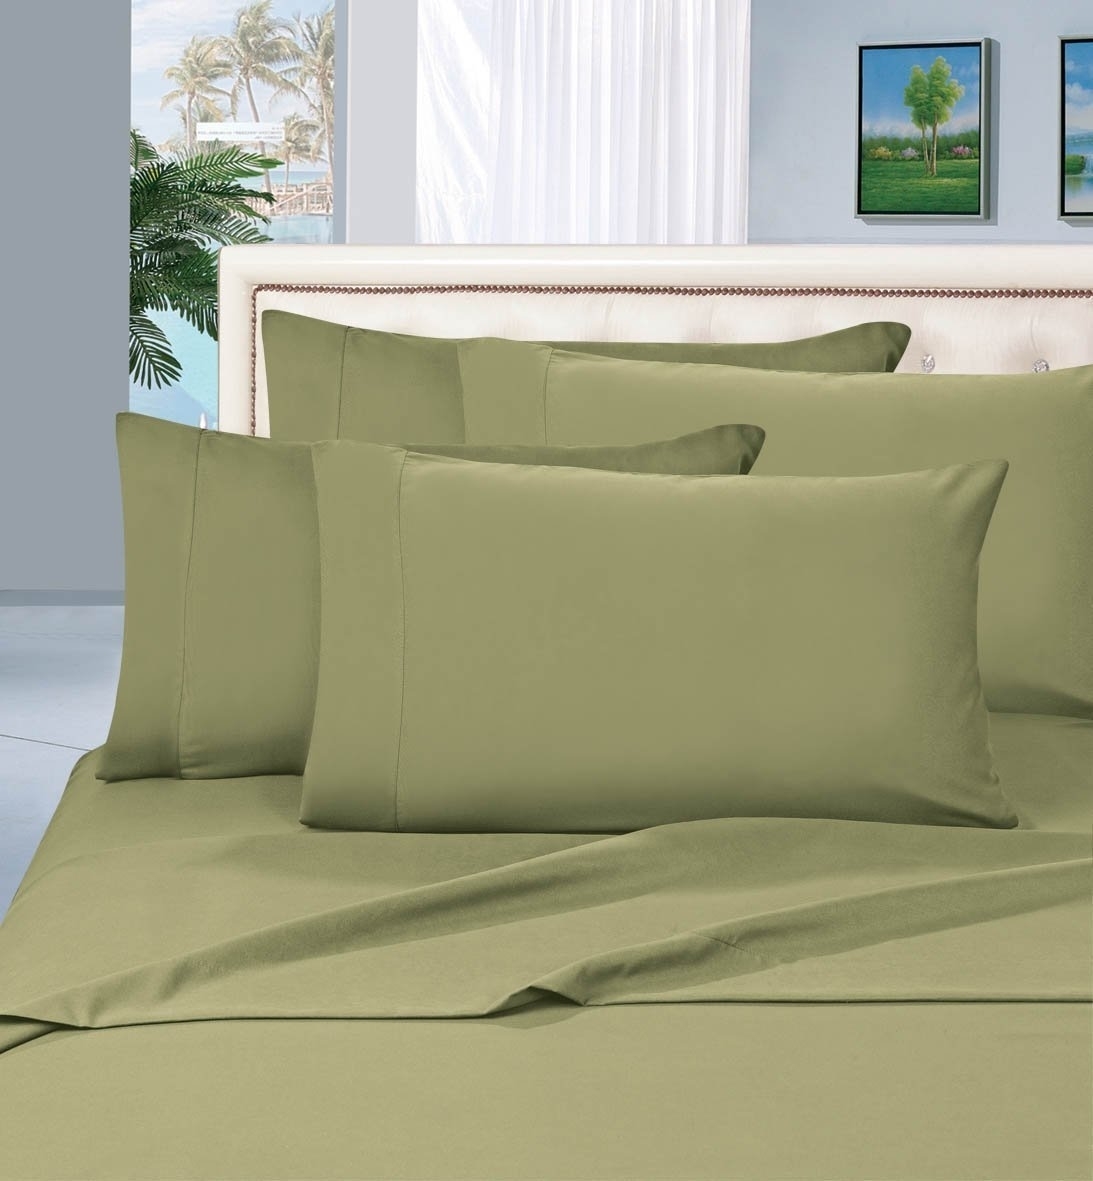 Elegant Comfort 1500 Series Wrinkle Resistant Egyptian Quality Hypoallergenic Ultra Soft Luxury 3-piece Bed Sheet Set, Twin, Sage-green